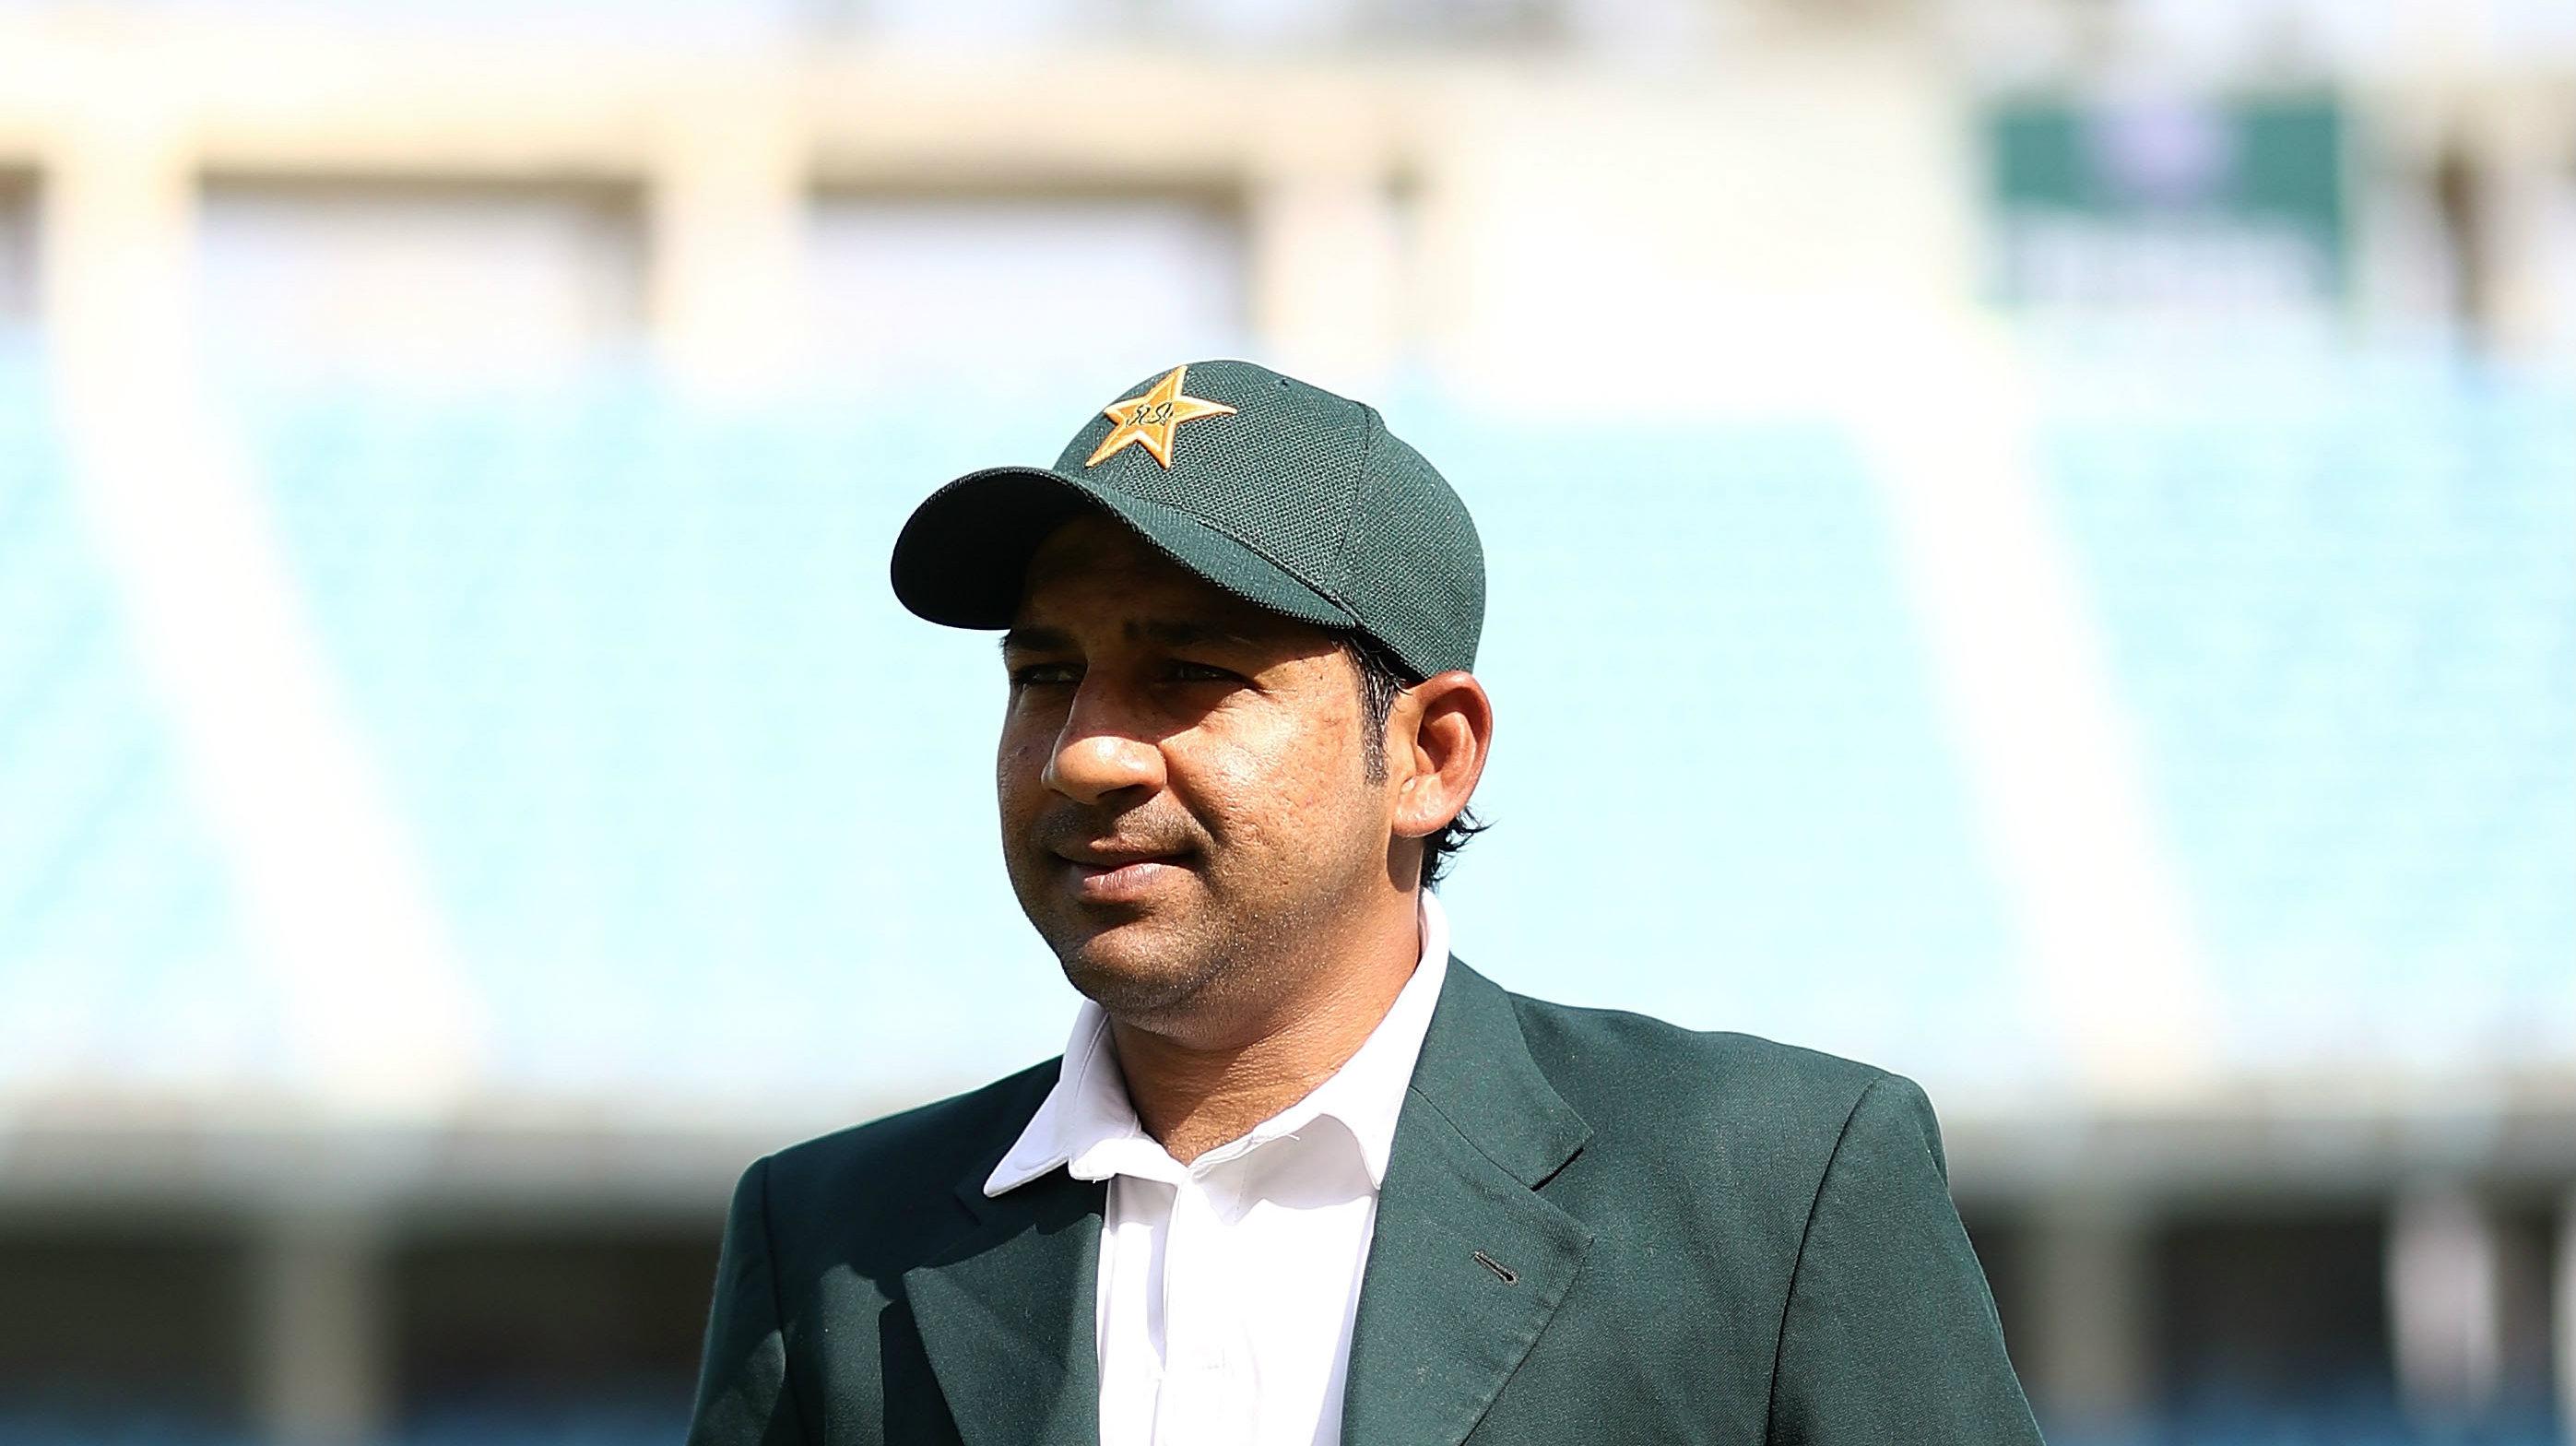 'Play without fear' – Sarfraz says Pakistan can tackle South Africa challenge